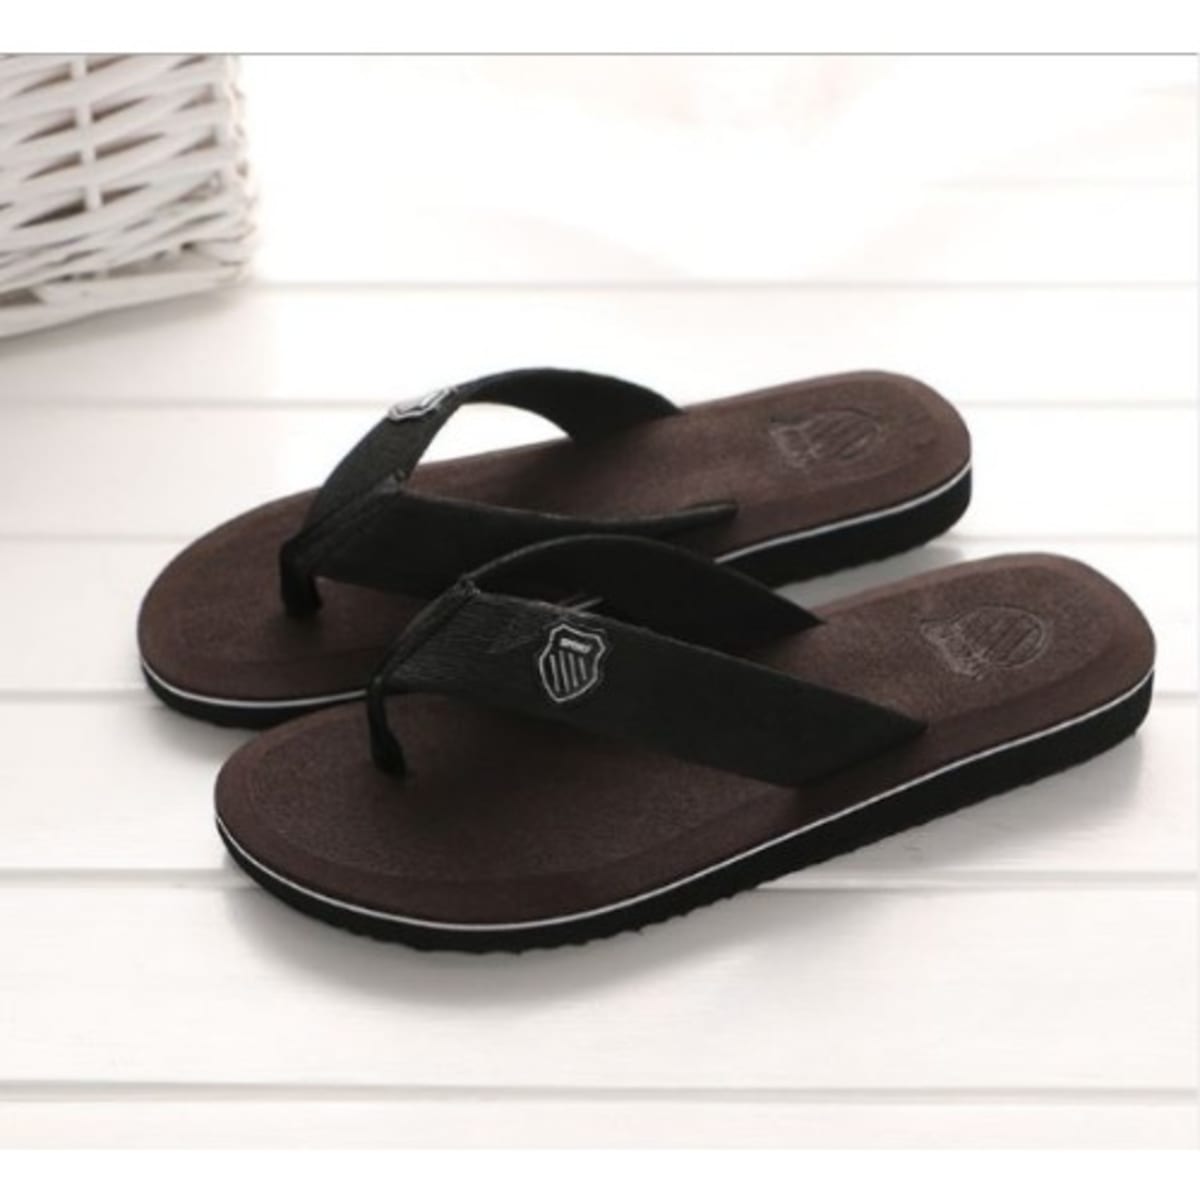 Wholesale Beach fashion men's slippers casual leather summer flip